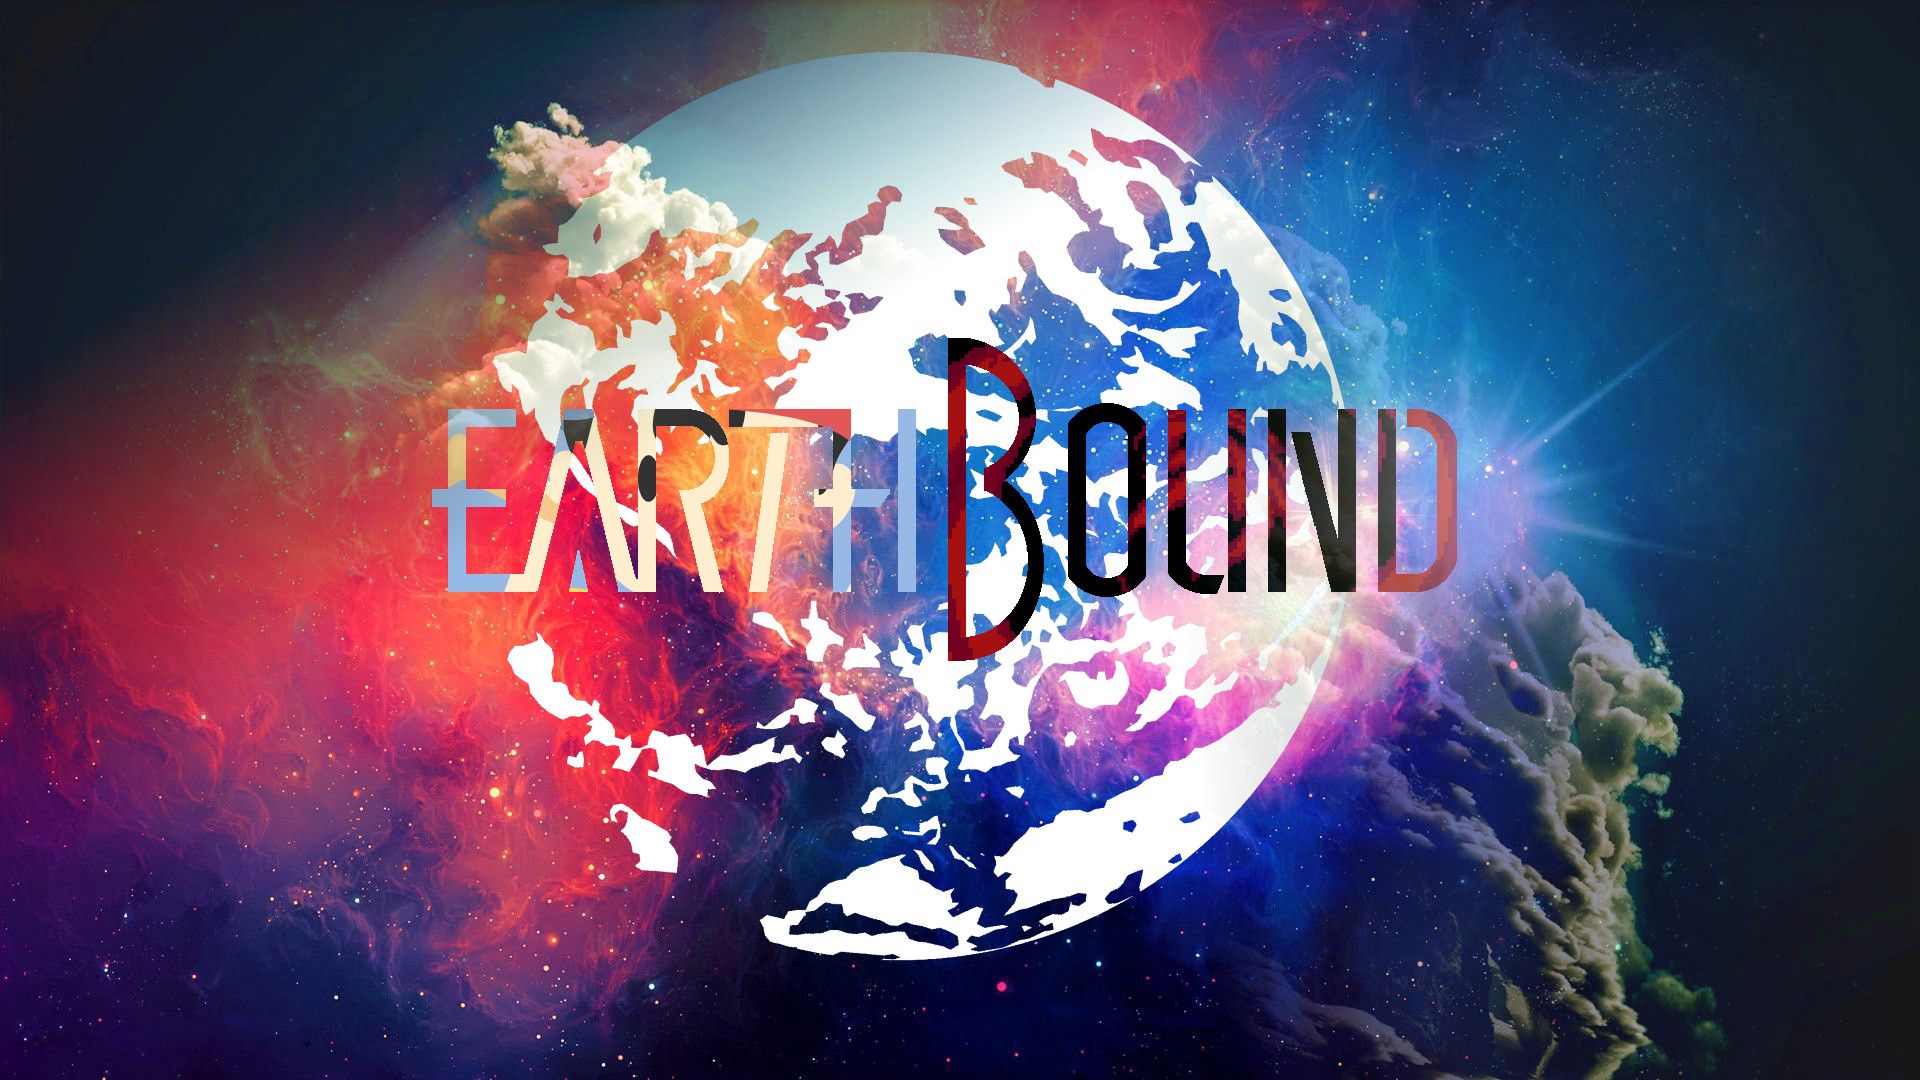 1920x1080 earthbound and mother 3 wallpaper - photo #38. EarthBound Backgrounds |  PixelsTalk.Net